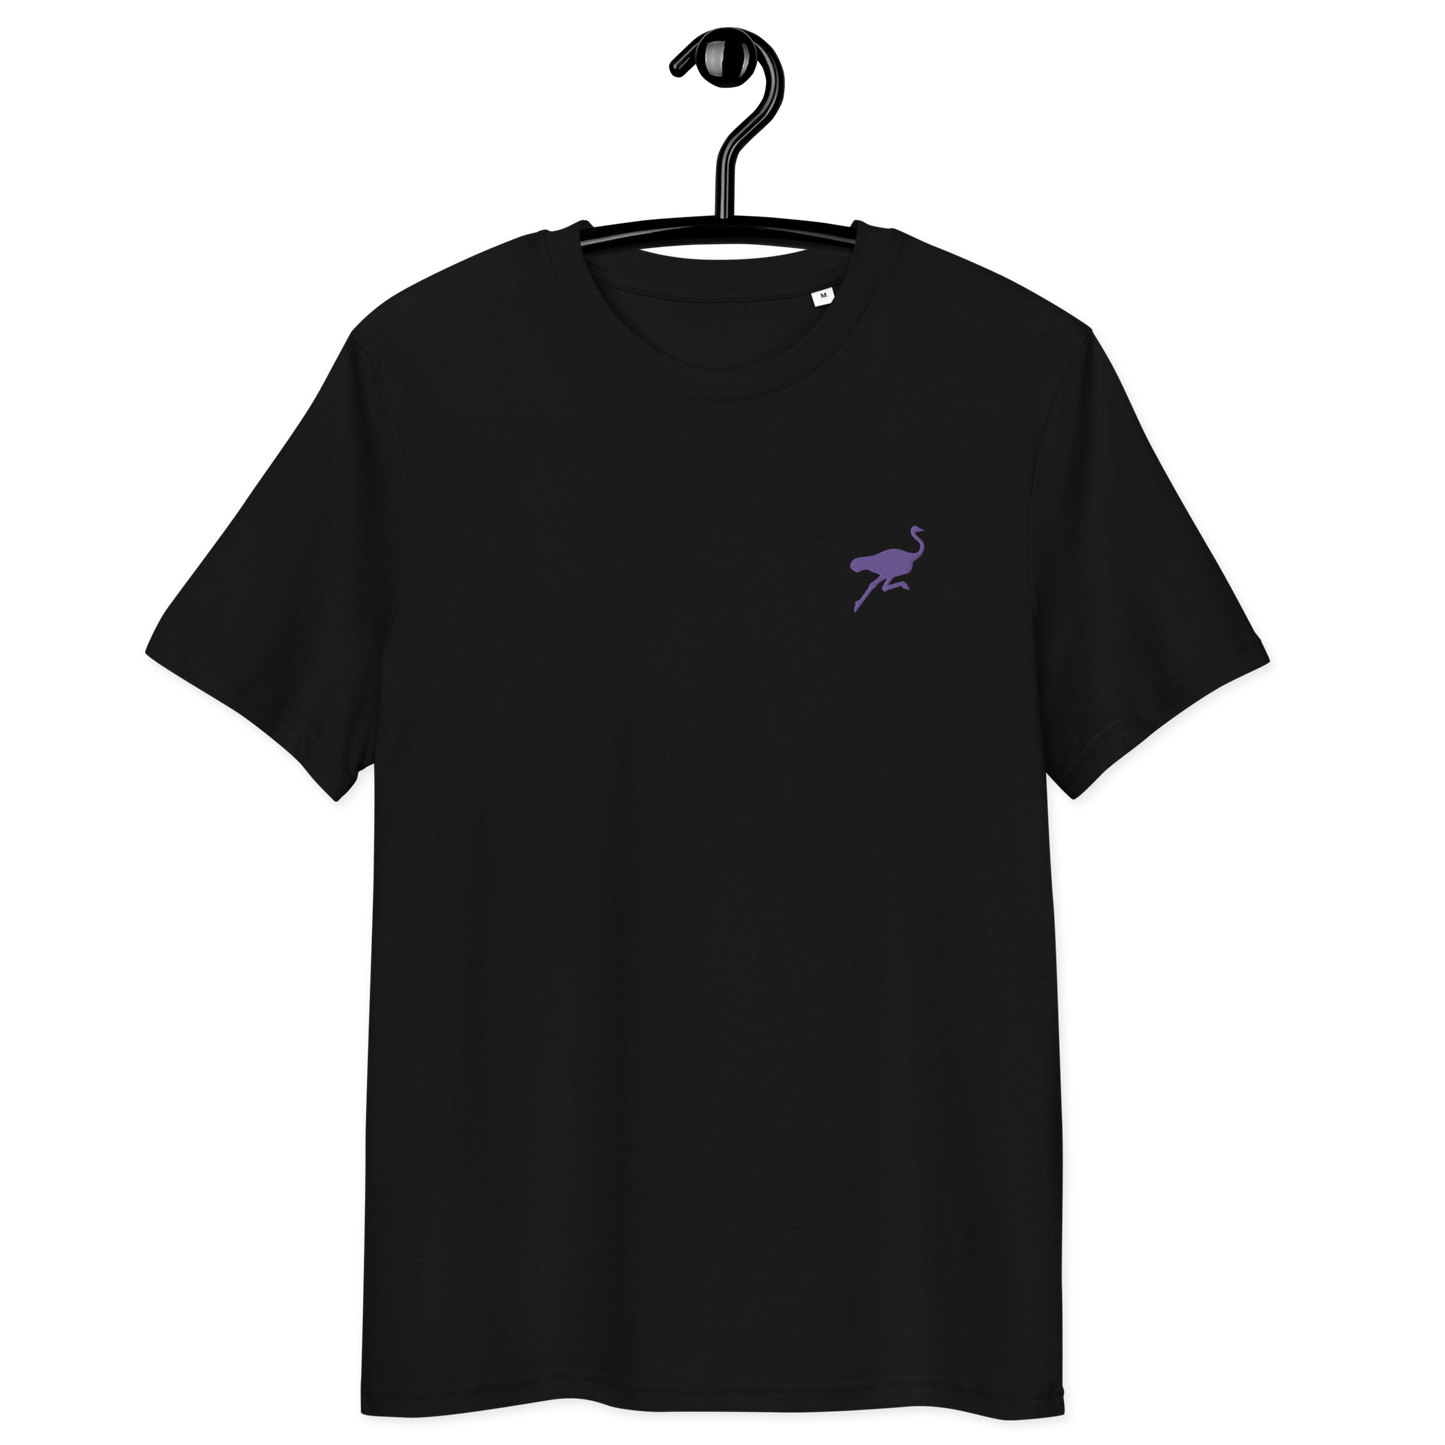 Front view of a black embroidered nostr t-shirt.